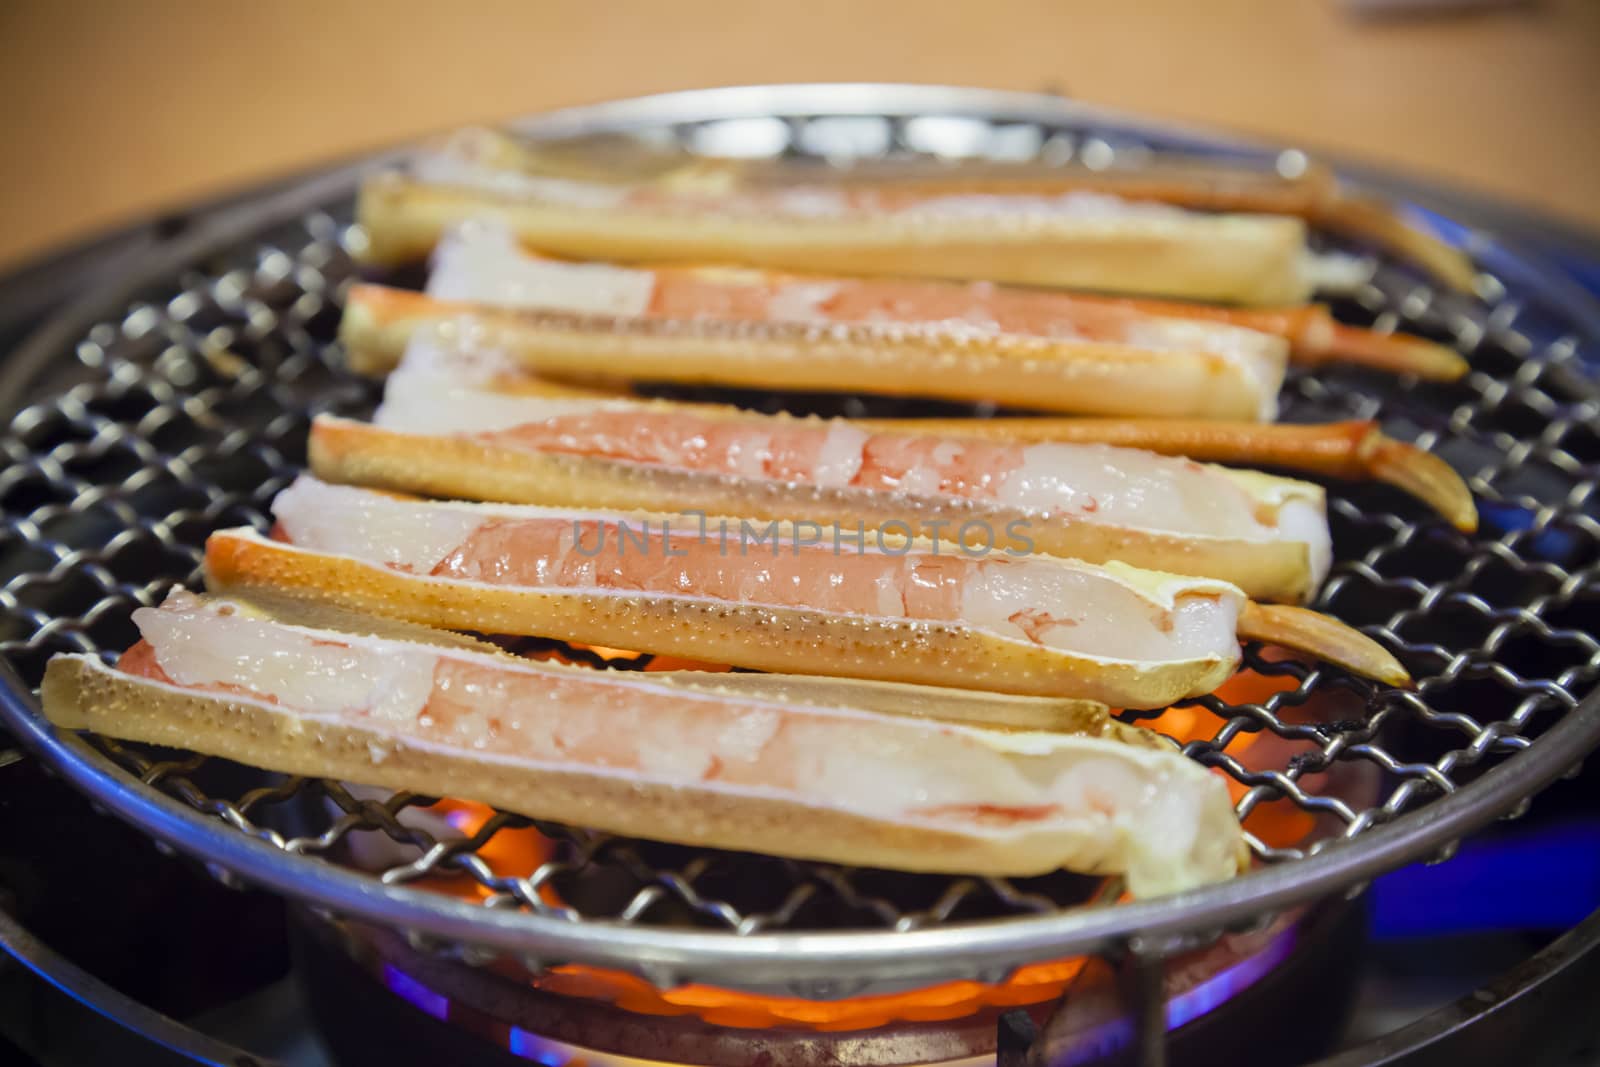 Barbeque crab legs in a Japanese restaurant